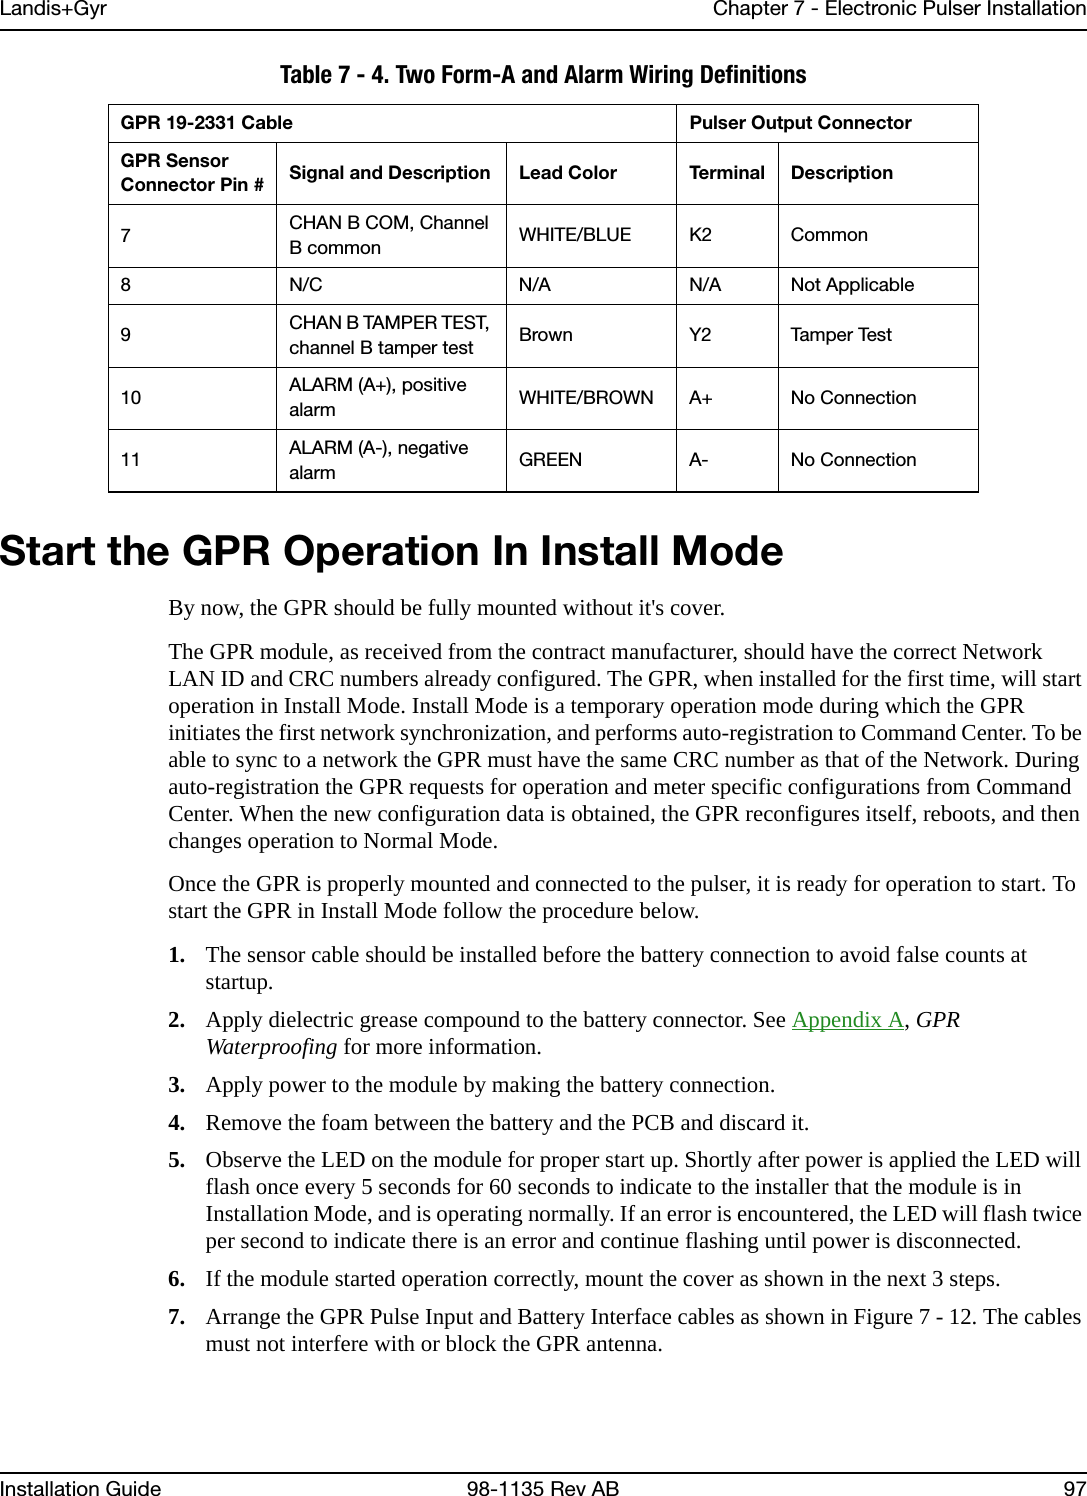 Landis+Gyr Chapter 7 - Electronic Pulser InstallationInstallation Guide 98-1135 Rev AB 97Start the GPR Operation In Install ModeBy now, the GPR should be fully mounted without it&apos;s cover.The GPR module, as received from the contract manufacturer, should have the correct Network LAN ID and CRC numbers already configured. The GPR, when installed for the first time, will start operation in Install Mode. Install Mode is a temporary operation mode during which the GPR initiates the first network synchronization, and performs auto-registration to Command Center. To be able to sync to a network the GPR must have the same CRC number as that of the Network. During auto-registration the GPR requests for operation and meter specific configurations from Command Center. When the new configuration data is obtained, the GPR reconfigures itself, reboots, and then changes operation to Normal Mode.Once the GPR is properly mounted and connected to the pulser, it is ready for operation to start. To start the GPR in Install Mode follow the procedure below.1. The sensor cable should be installed before the battery connection to avoid false counts at startup.2. Apply dielectric grease compound to the battery connector. See Appendix A, GPR Waterproofing for more information.3. Apply power to the module by making the battery connection.4. Remove the foam between the battery and the PCB and discard it.5. Observe the LED on the module for proper start up. Shortly after power is applied the LED will flash once every 5 seconds for 60 seconds to indicate to the installer that the module is in Installation Mode, and is operating normally. If an error is encountered, the LED will flash twice per second to indicate there is an error and continue flashing until power is disconnected.6. If the module started operation correctly, mount the cover as shown in the next 3 steps.7. Arrange the GPR Pulse Input and Battery Interface cables as shown in Figure 7 - 12. The cables must not interfere with or block the GPR antenna.7CHAN B COM, Channel B common WHITE/BLUE K2 Common8 N/C N/A N/A Not Applicable9CHAN B TAMPER TEST, channel B tamper test Brown Y2 Tamper Test10 ALARM (A+), positive alarm WHITE/BROWN A+ No Connection11 ALARM (A-), negative alarm GREEN A- No ConnectionTable 7 - 4. Two Form-A and Alarm Wiring DefinitionsGPR 19-2331 Cable Pulser Output ConnectorGPR Sensor Connector Pin # Signal and Description Lead Color Terminal Description